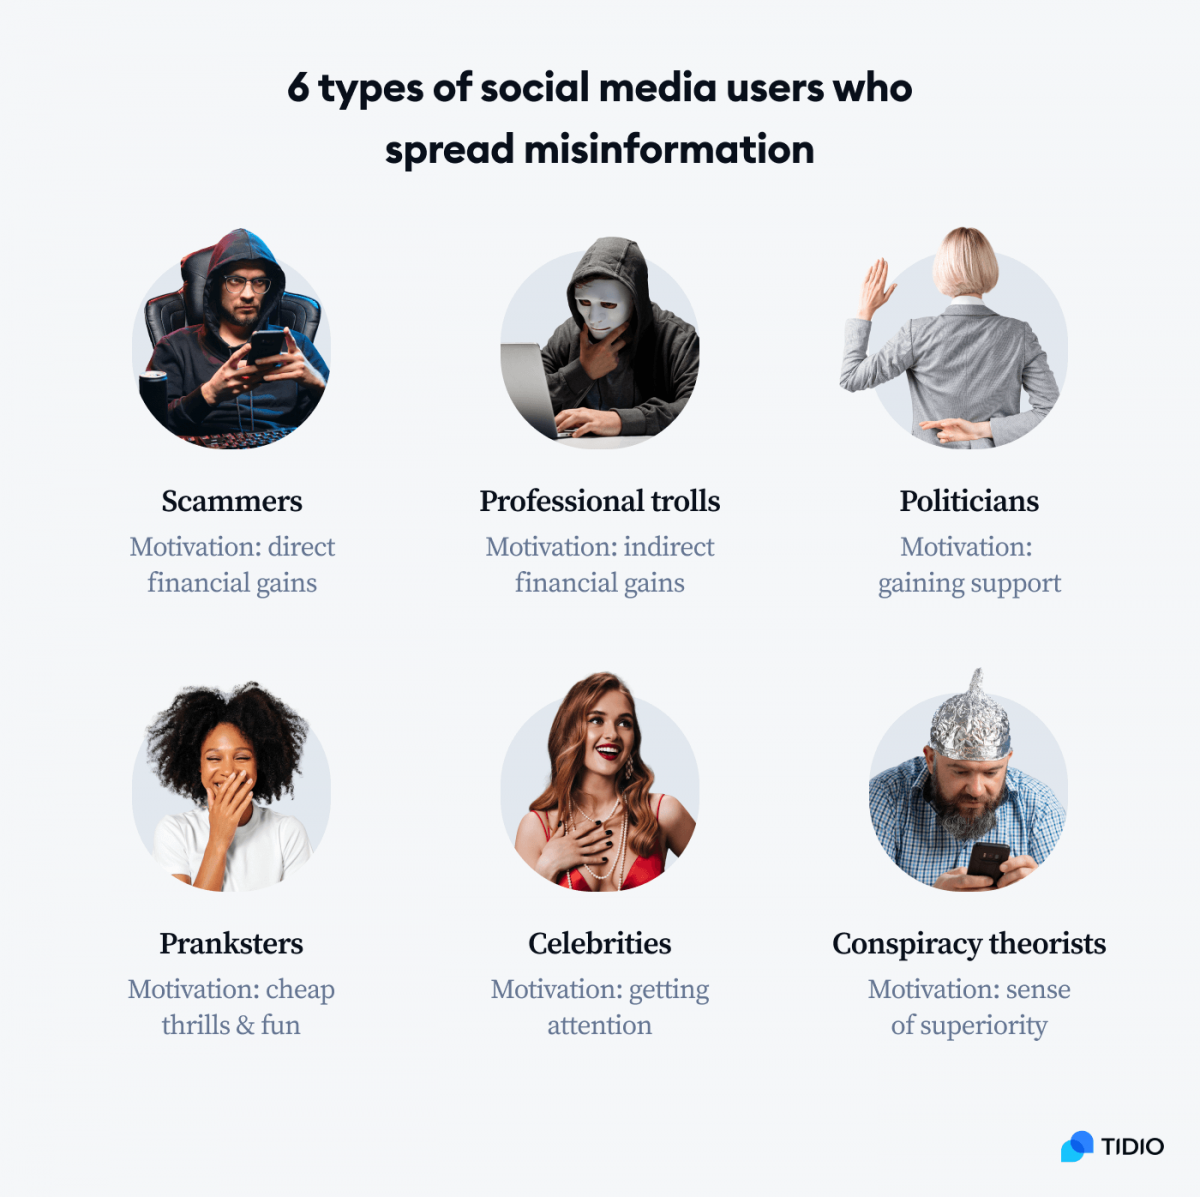 6 types of social media users who spread disinformation